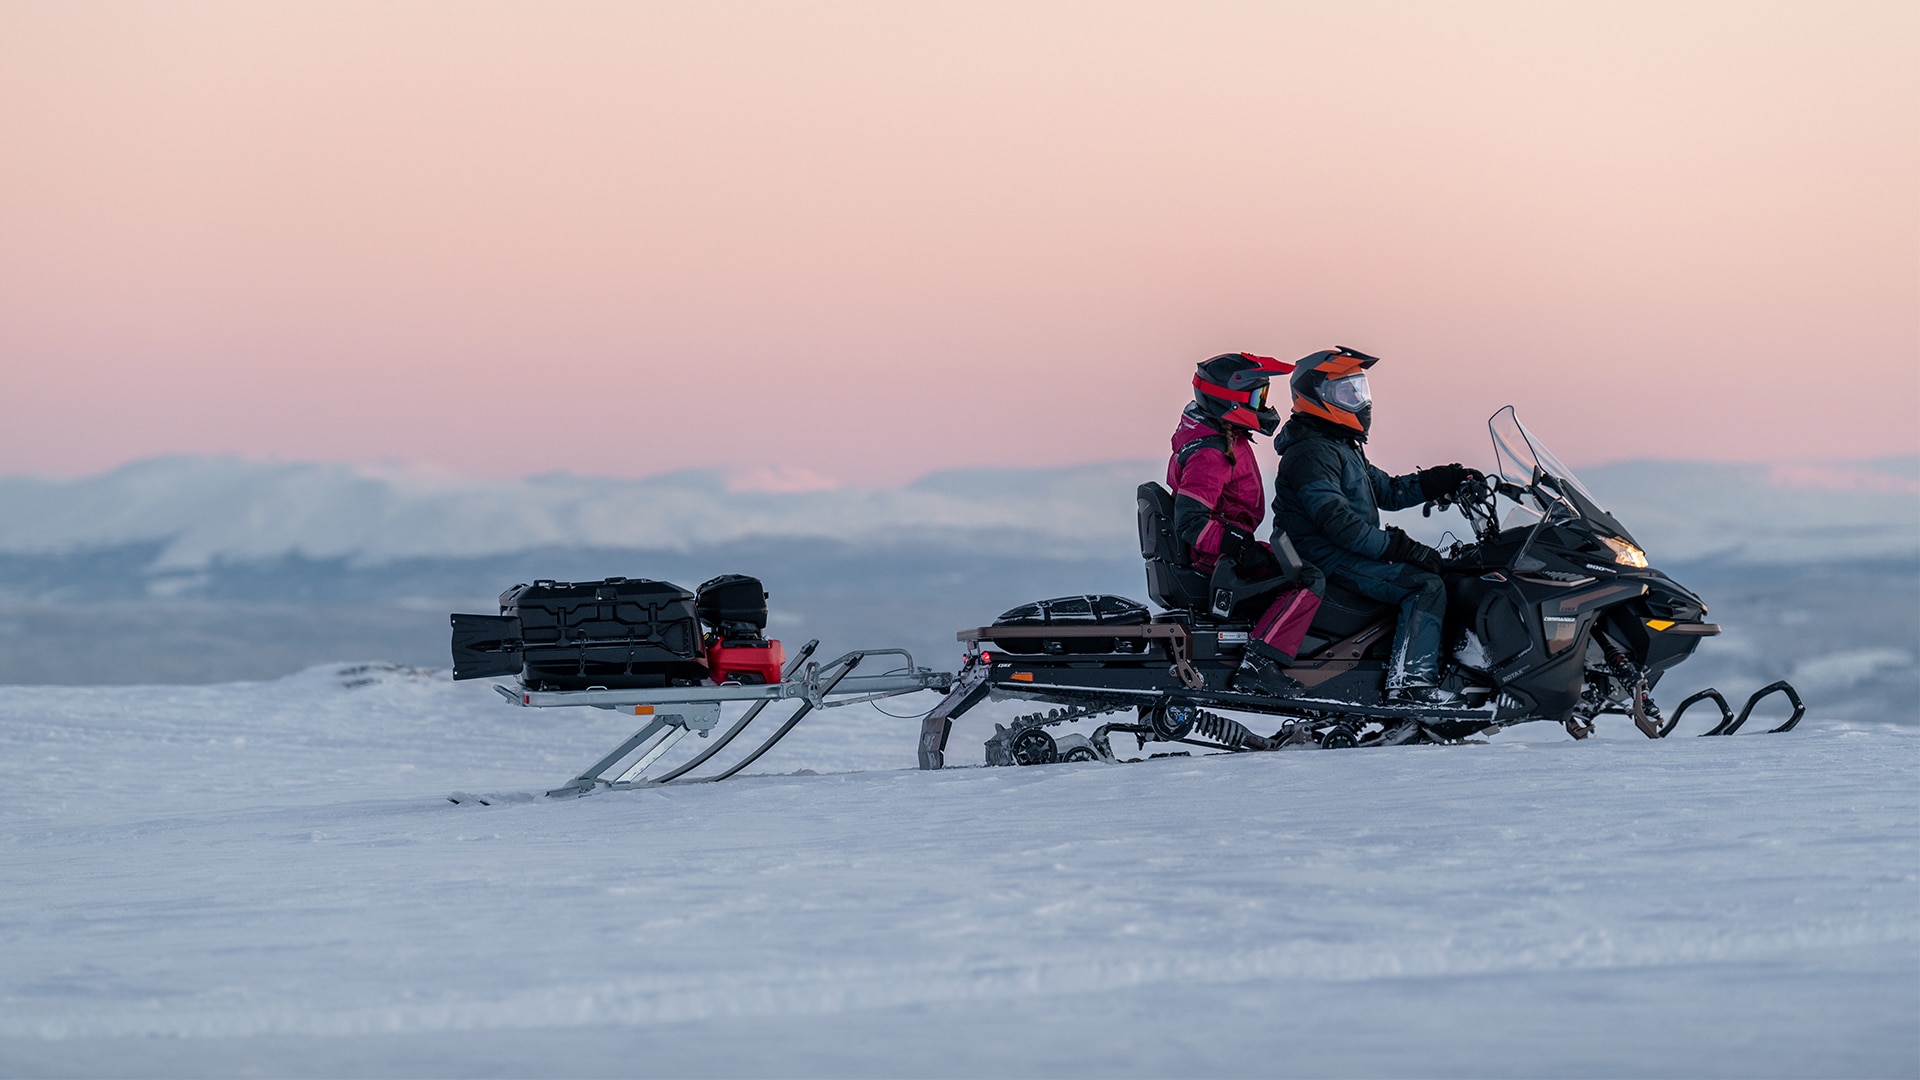 Couple riding with Lynx Commander Grand Tourer snowmobile on the mountains